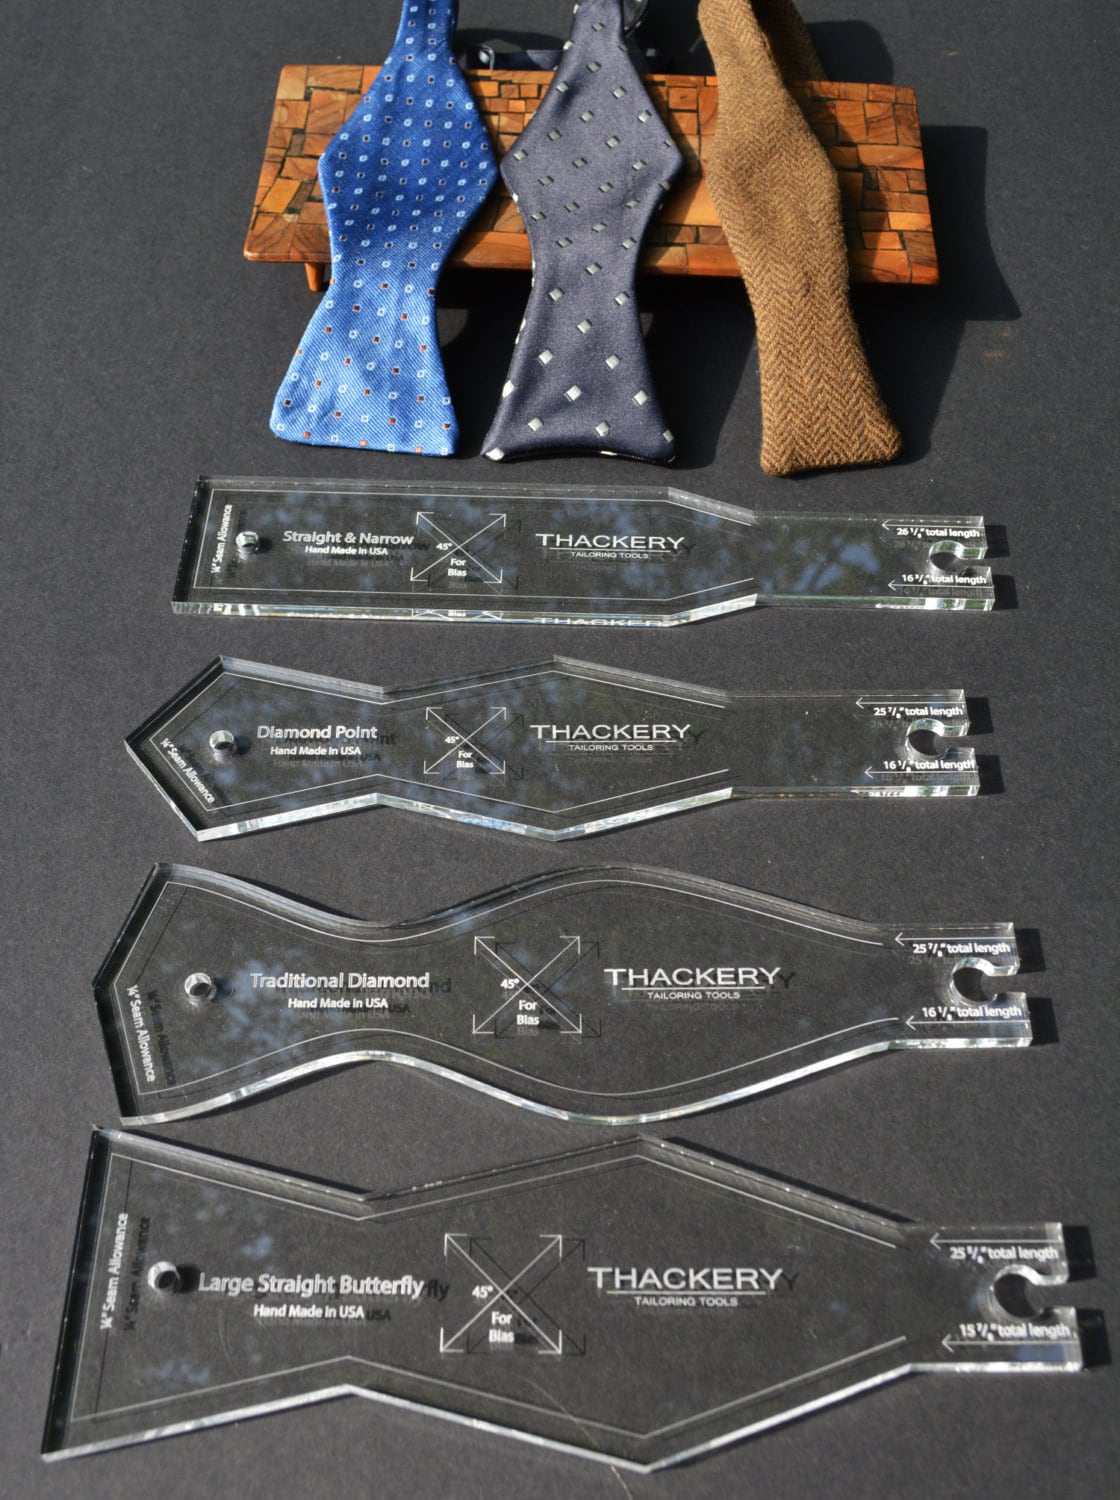 Complete 13 Piece set of 1/4" Acrylic BOW TIE PATTERNS, 11 Patterns + 2 Extensions - Superb Quality, no finer set available in the world